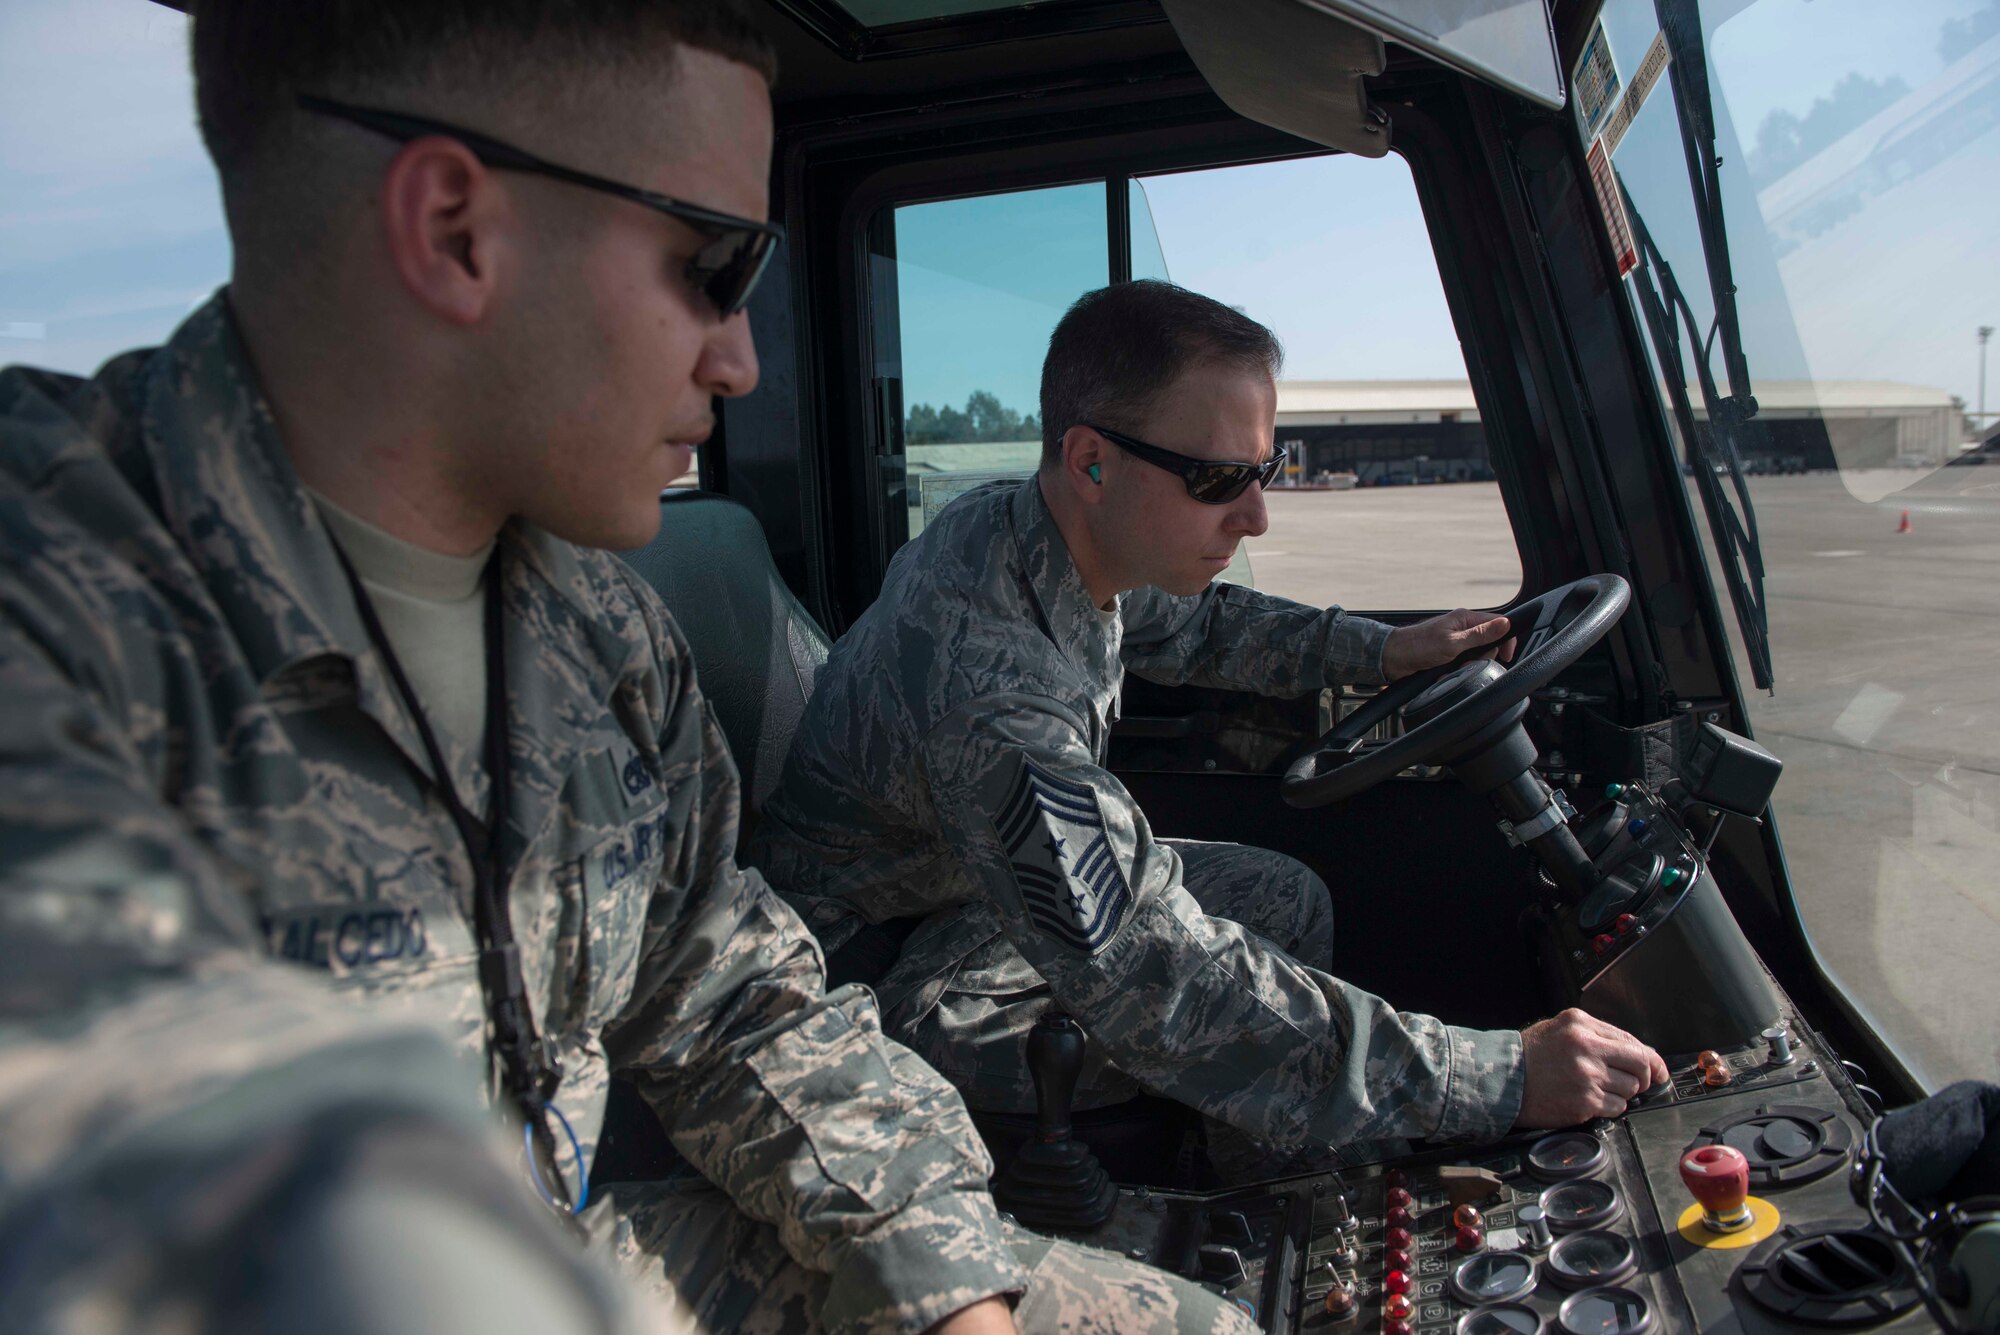 U.S. Air Force Chief Master Sgt. Mark Redden, 521st Air Mobility Operations Wing command chief, starts a U-30 aircraft tow vehicle while U.S. Air Force Staff Sgt. Michael Salcedo, 728th Air Mobility Squadron crew chief, monitors him, April 5, 2016, at Incirlik Air Base, Turkey. During his visit, Redden toured the 728th AMS facilities and interacted with Airmen throughout the day. (U.S. Air Force photo by Senior Airman John Nieves Camacho/Released)